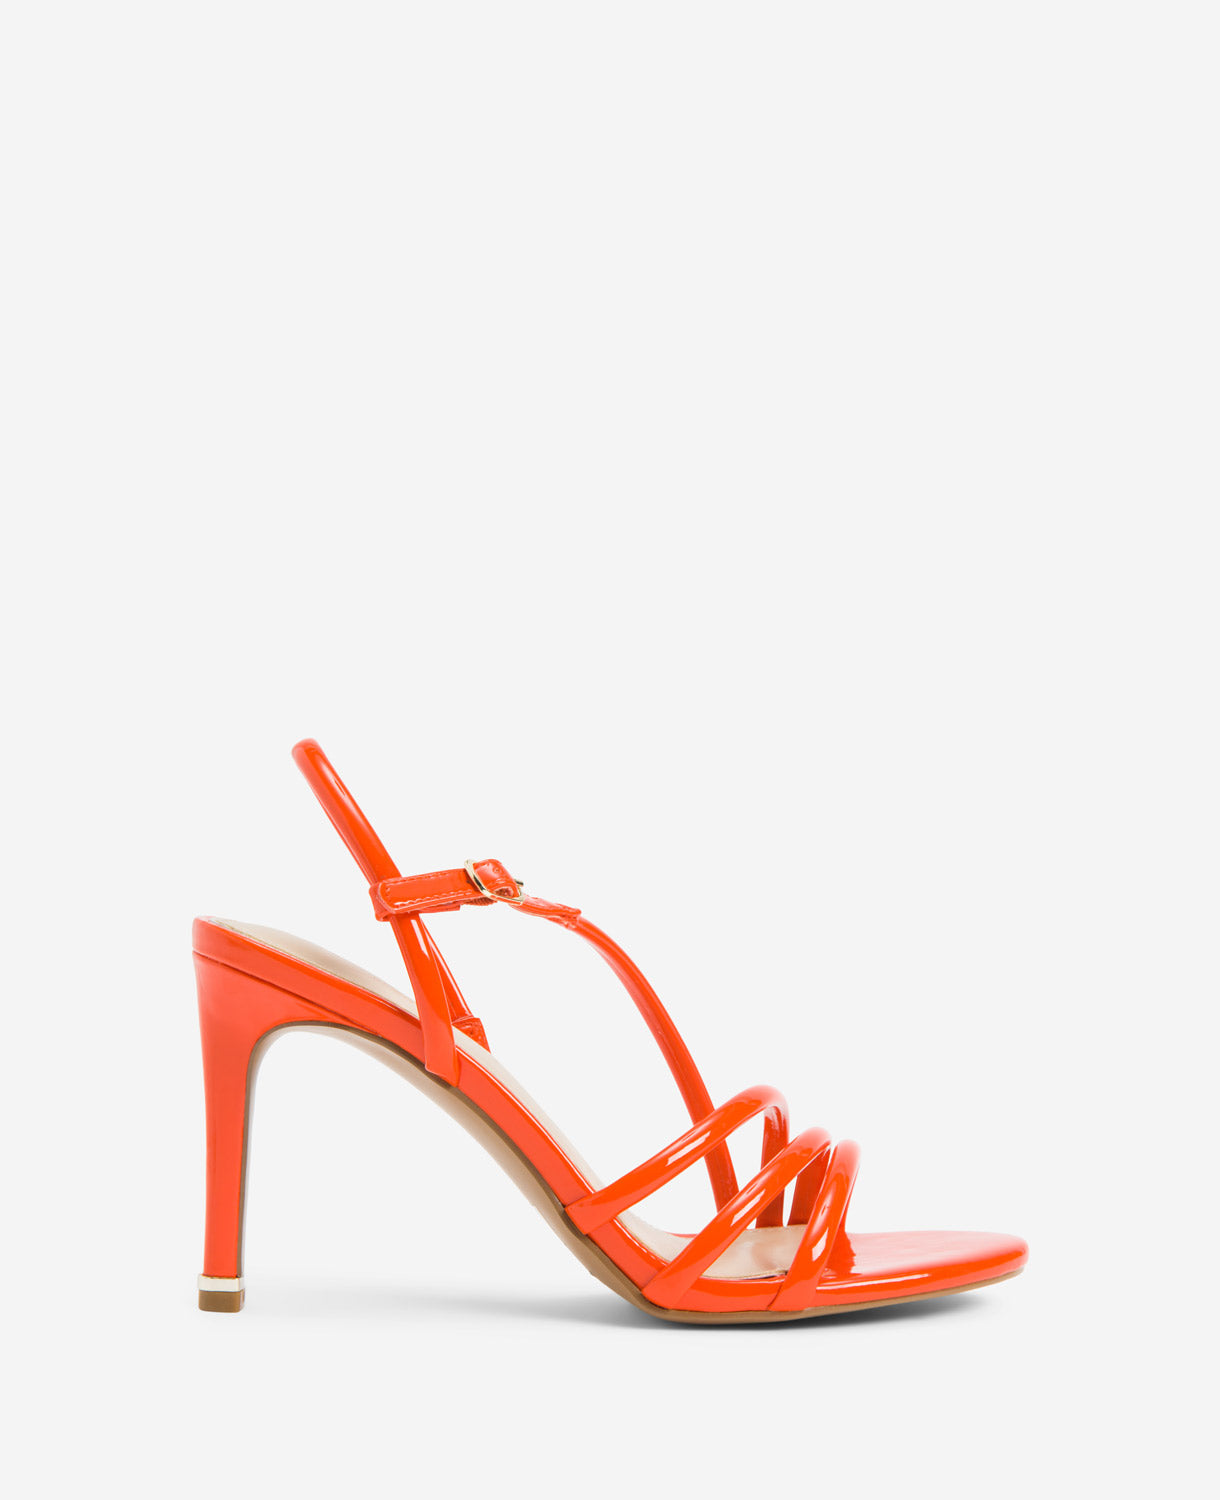 KENNETH COLE BAXLEY PATENT HEELED SANDAL